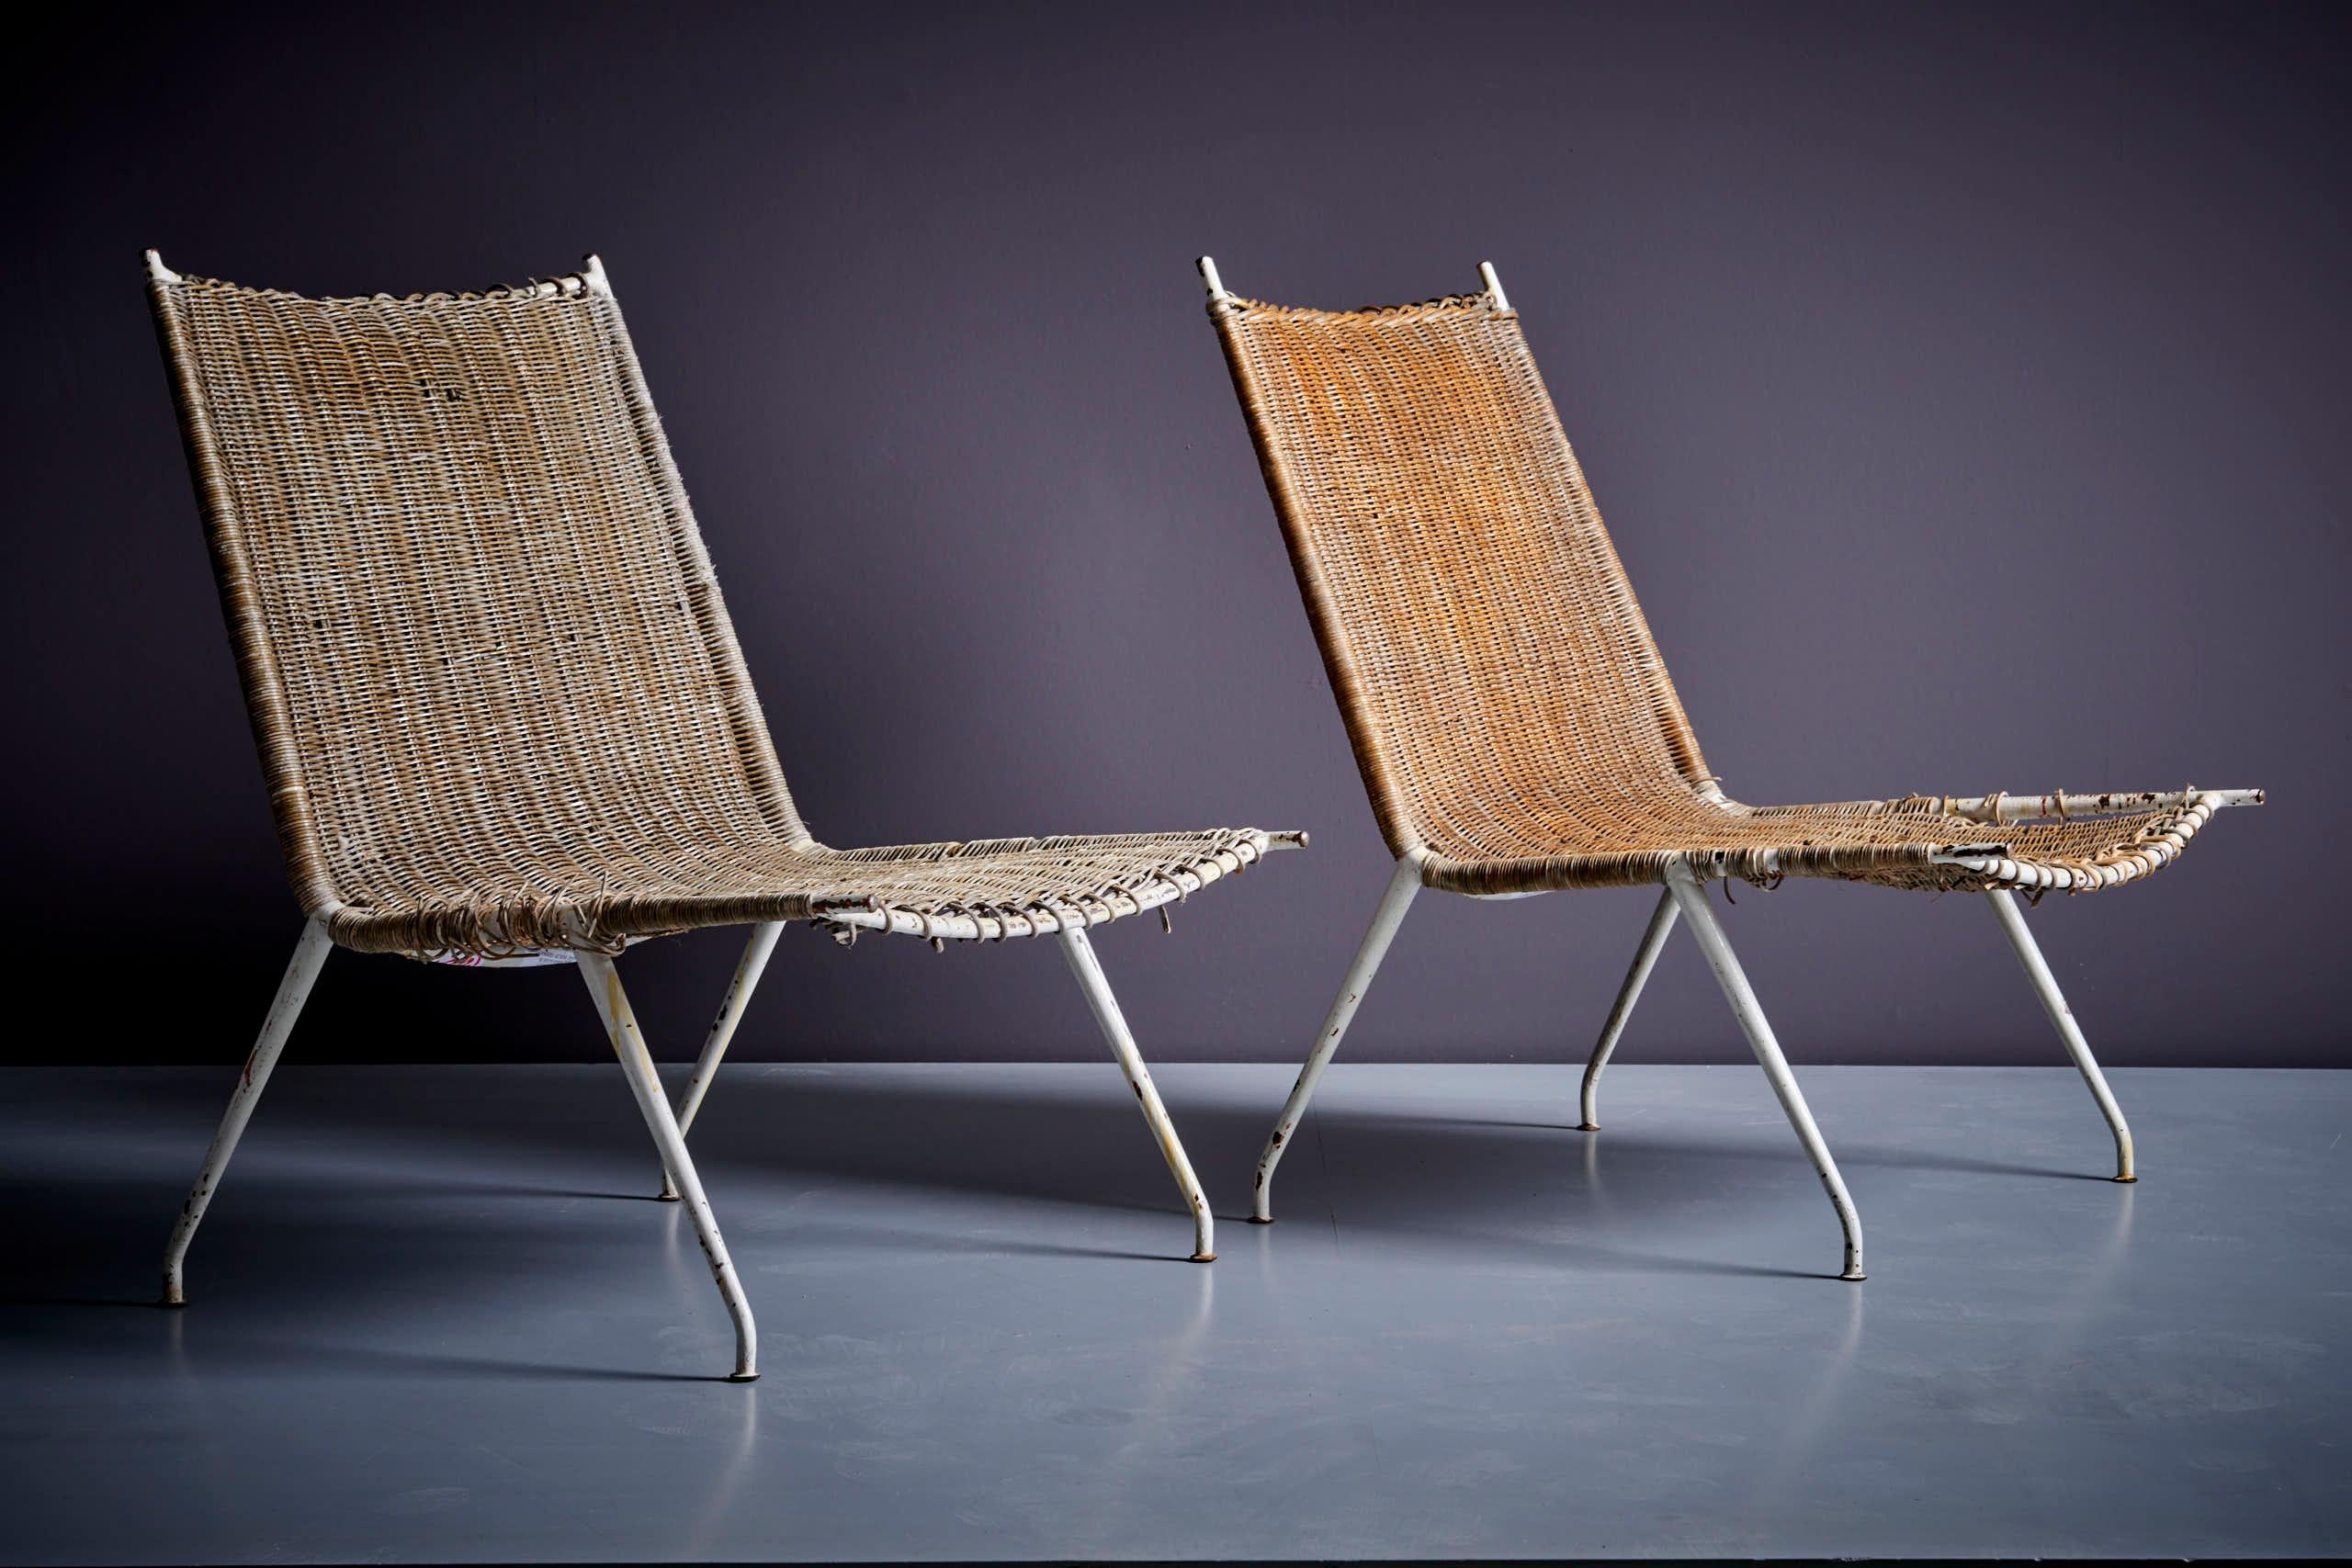 Raoul Guys for Airborne Lounge Chair Pair, France - 1950s in Rattan and Metal. We offer restoration and reupholstery in our in-house atelier. Please ask for a quote
